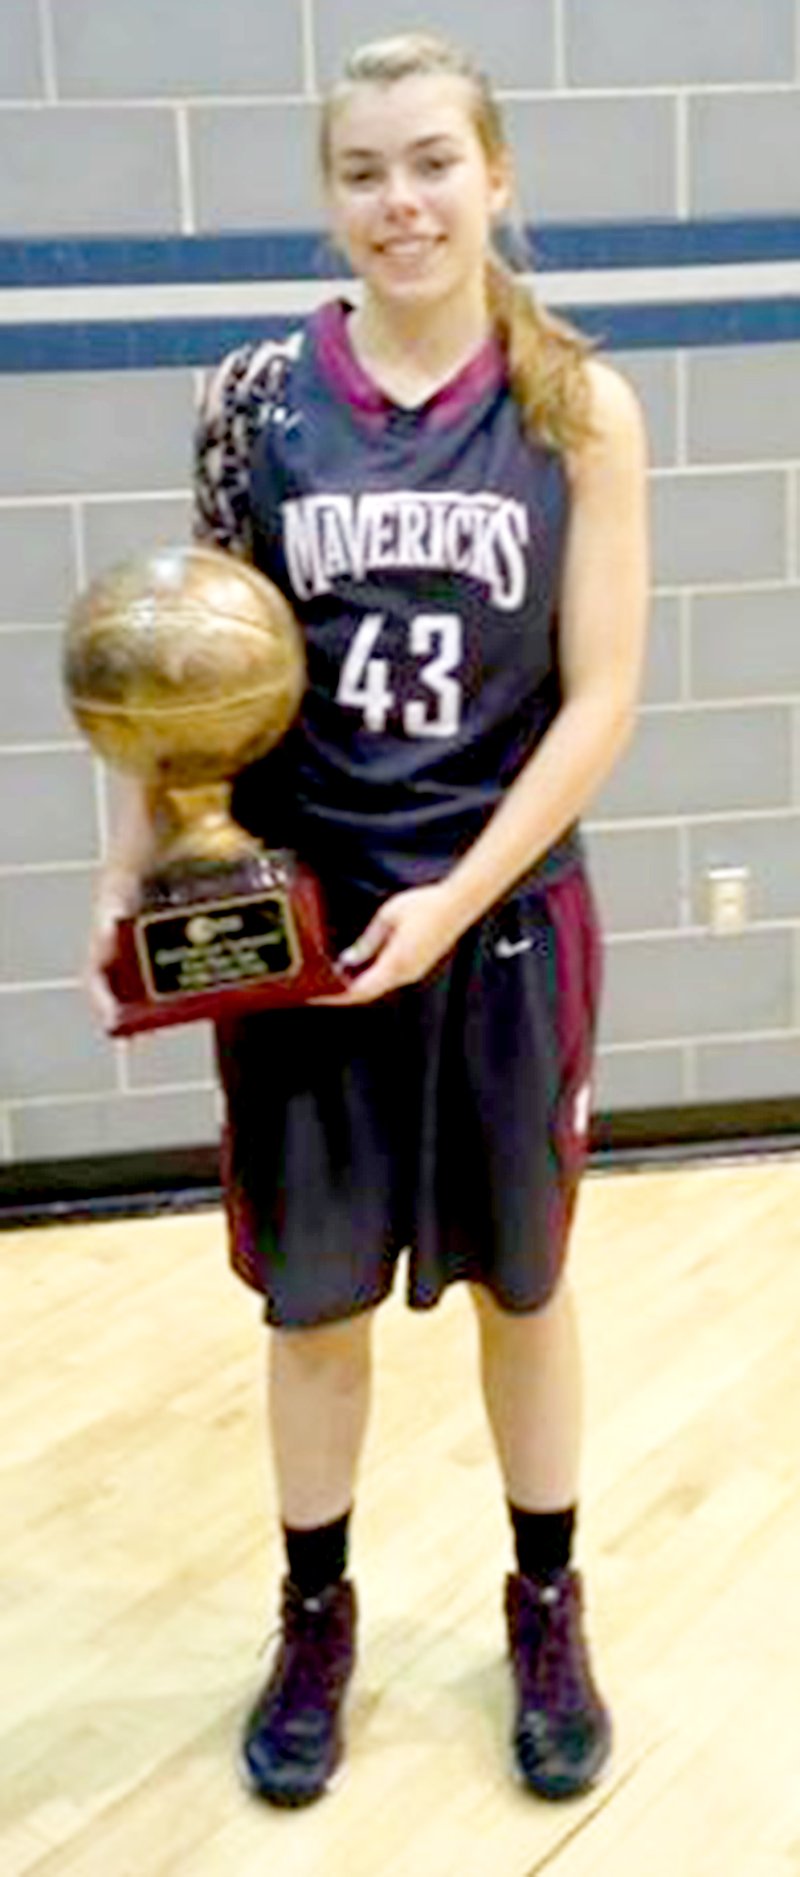 Submitted Photo Haley Borgeteien-James competed Aug. 1-3 in MAYB Nationals in Oklahoma City, Okla., and helped her team, the Arkansas Mavericks, go 8-0 through three days of competition to win its fifth MAYB National Championship to go along with a 1 AAU National Championship.